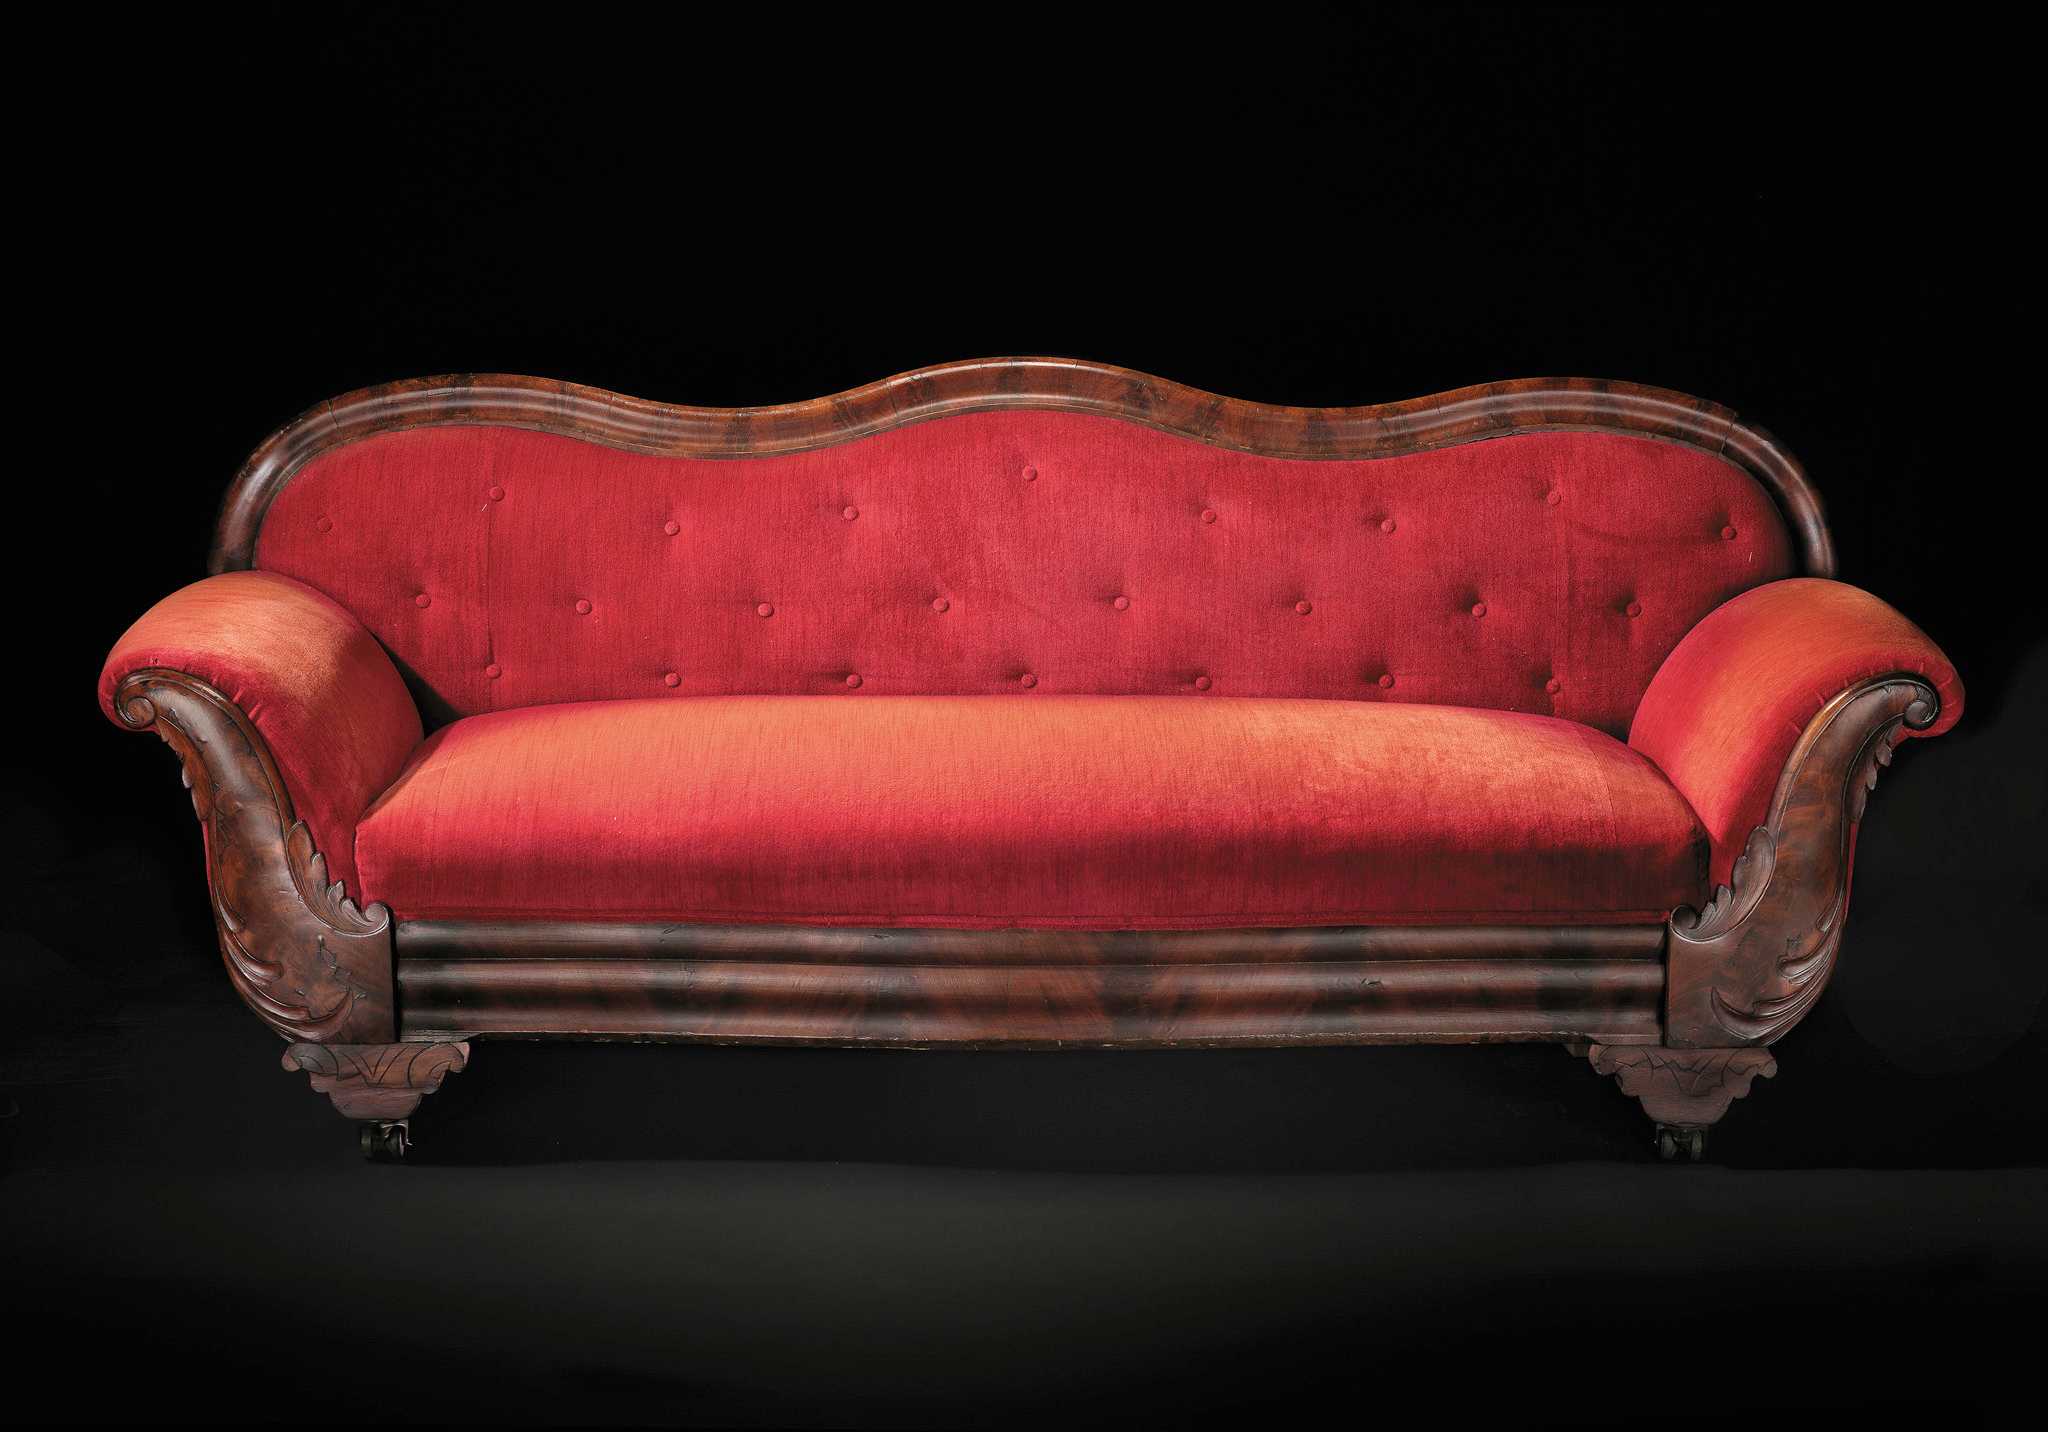 A Late Classical mahogany sofa, upholstered in red, with serpentine, tufted back and wing scroll arms, crotch mahogany decorative veneers on crest, arms, and apron.